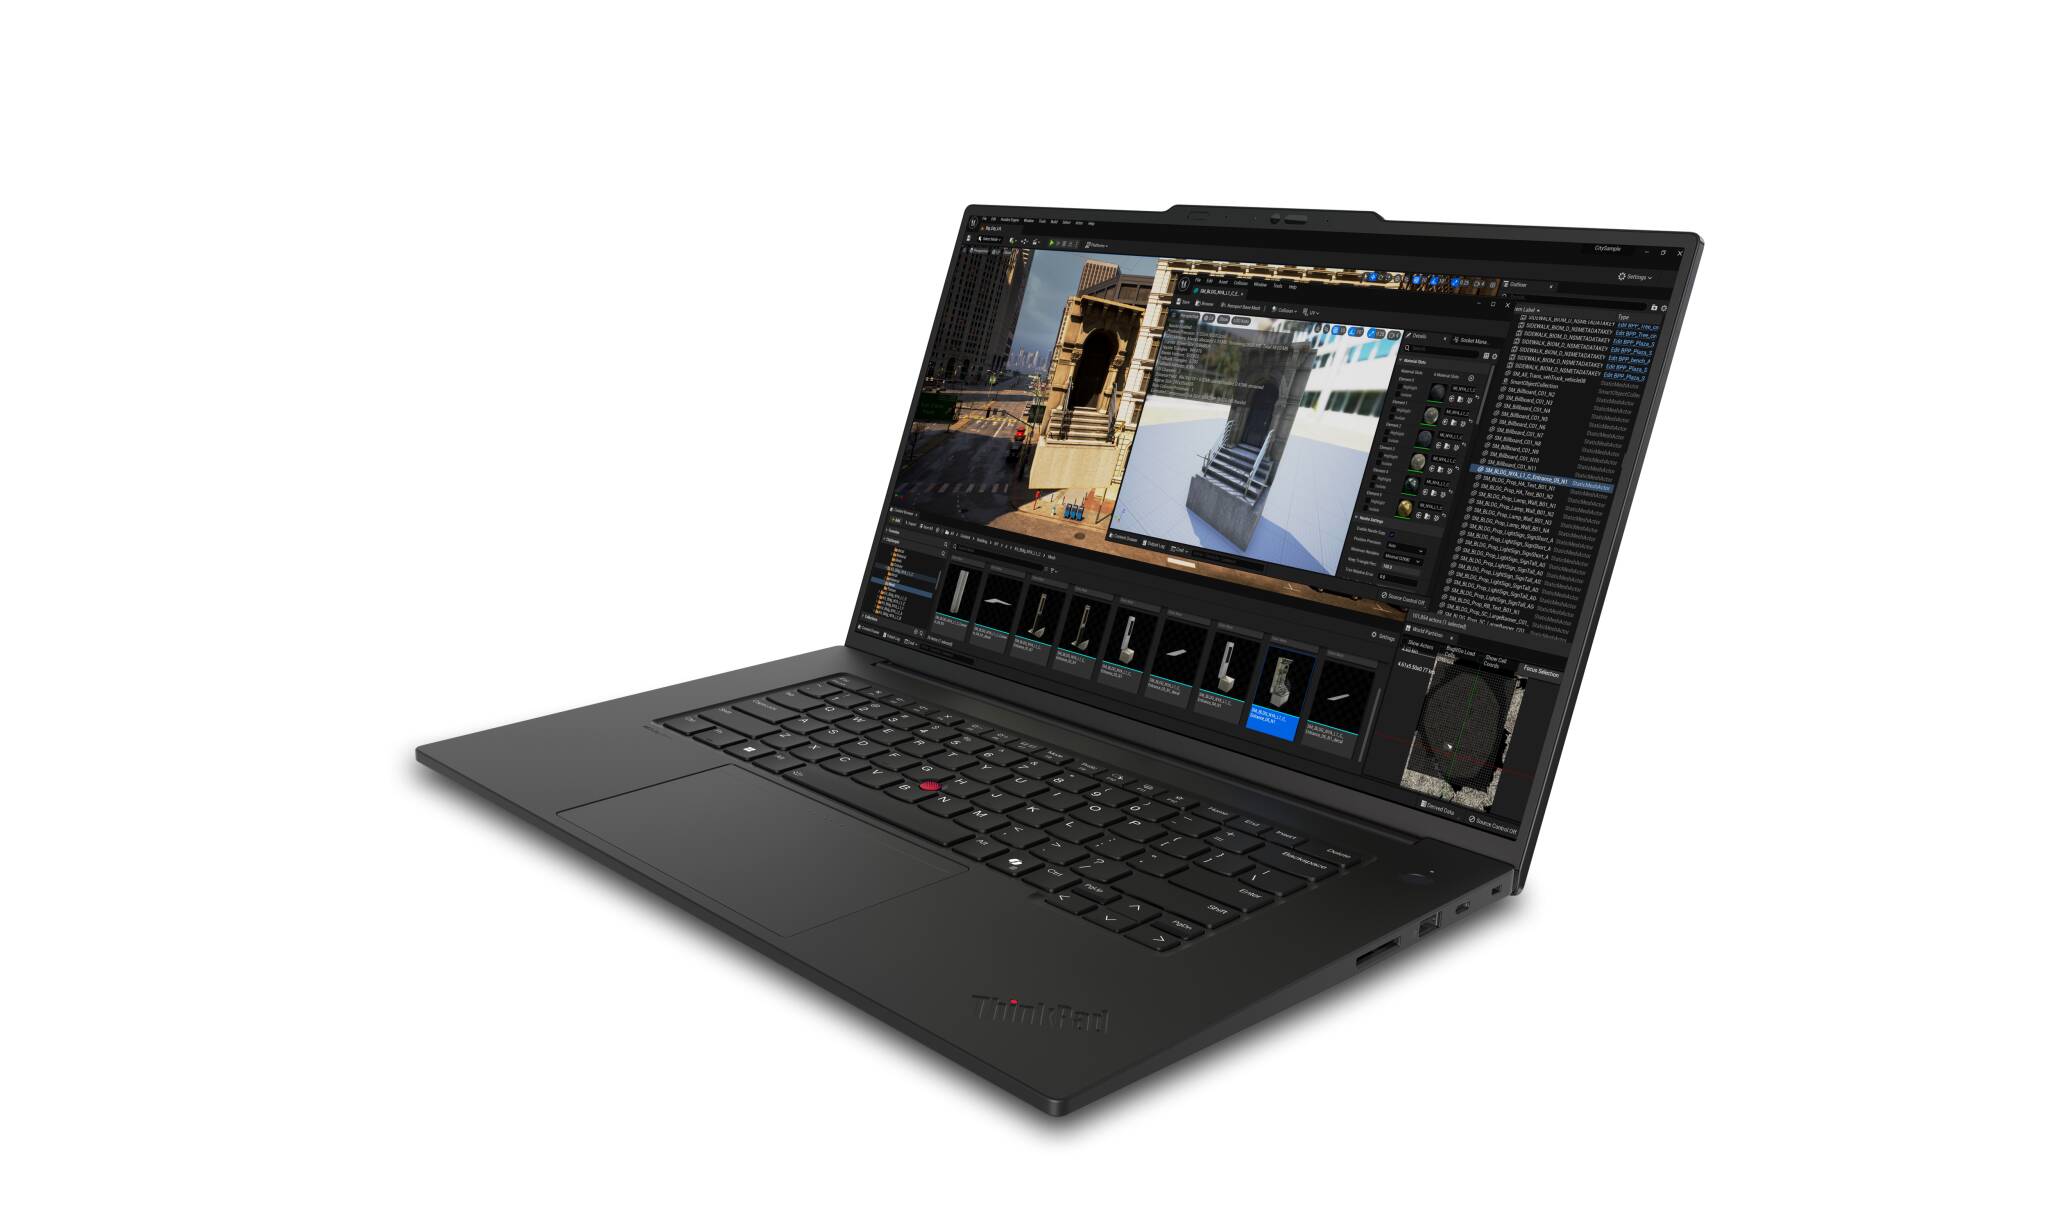 Lenovo's latest ThinkPad P1 Gen 7 laptop is set to be the first to use the new LPCAMM2 memory form factor, the successor to SODIMM sticks. While Lenov